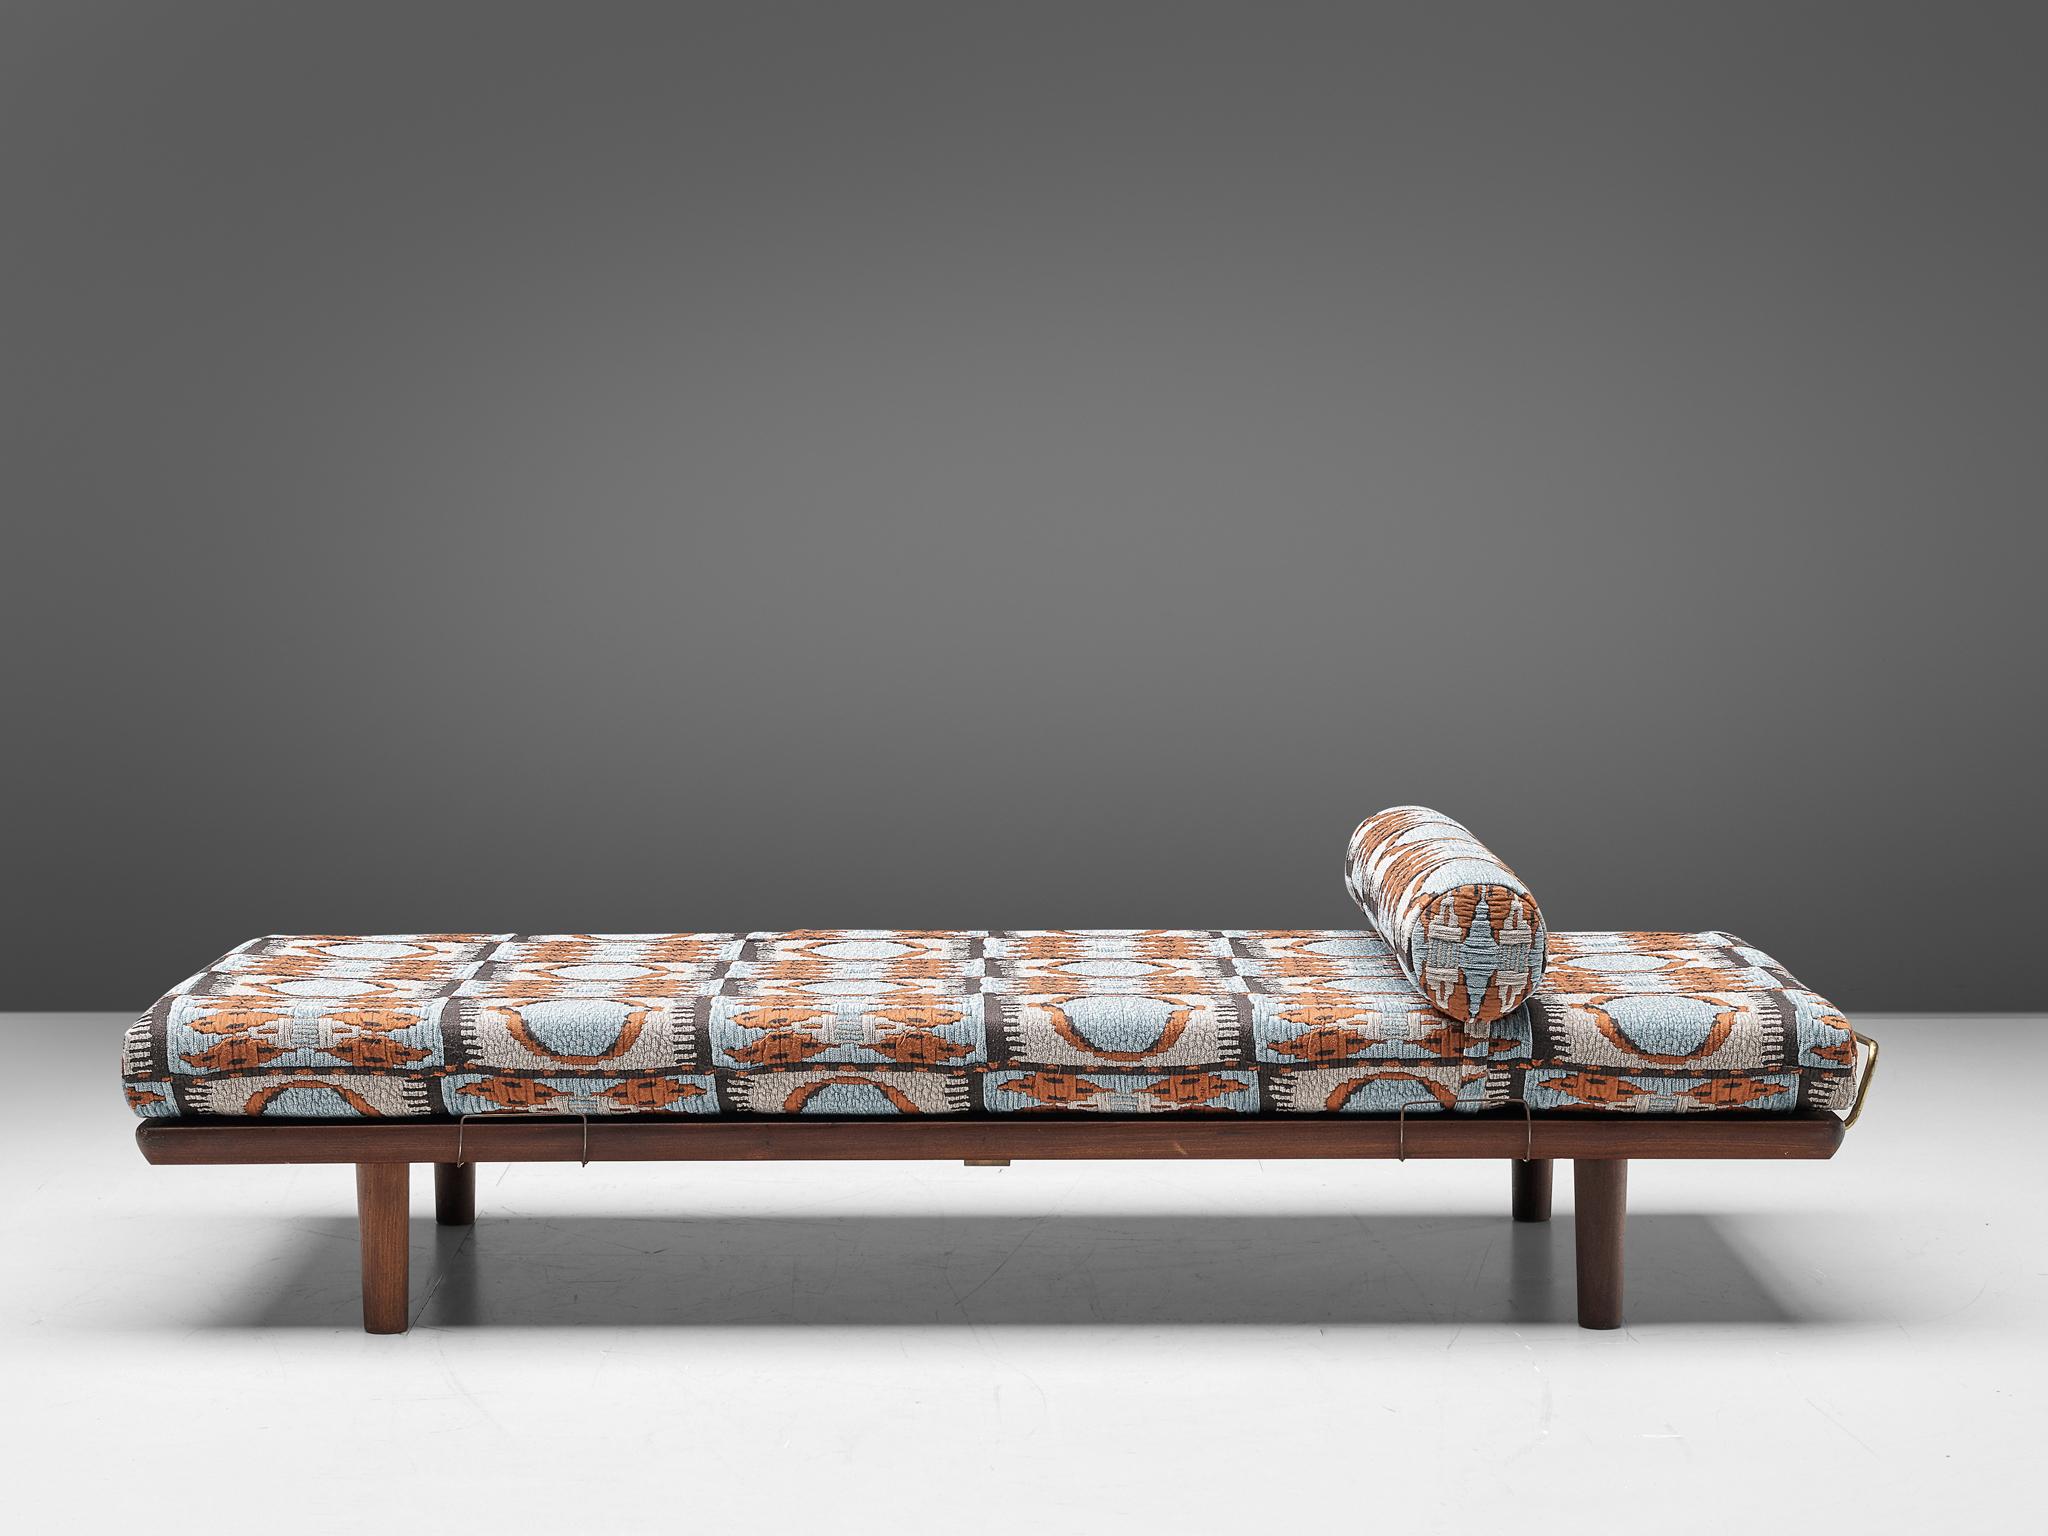 Hans J. Wegner for GETAMA, daybed GE19, oak and fabric, Denmark, 1950s.

Scandinavian Modern daybed GE19 in oak, designed by Hans J. Wegner for Getamain the 1950s. Solid Oak is used for the legs and the frame. The brass support bars on both sides